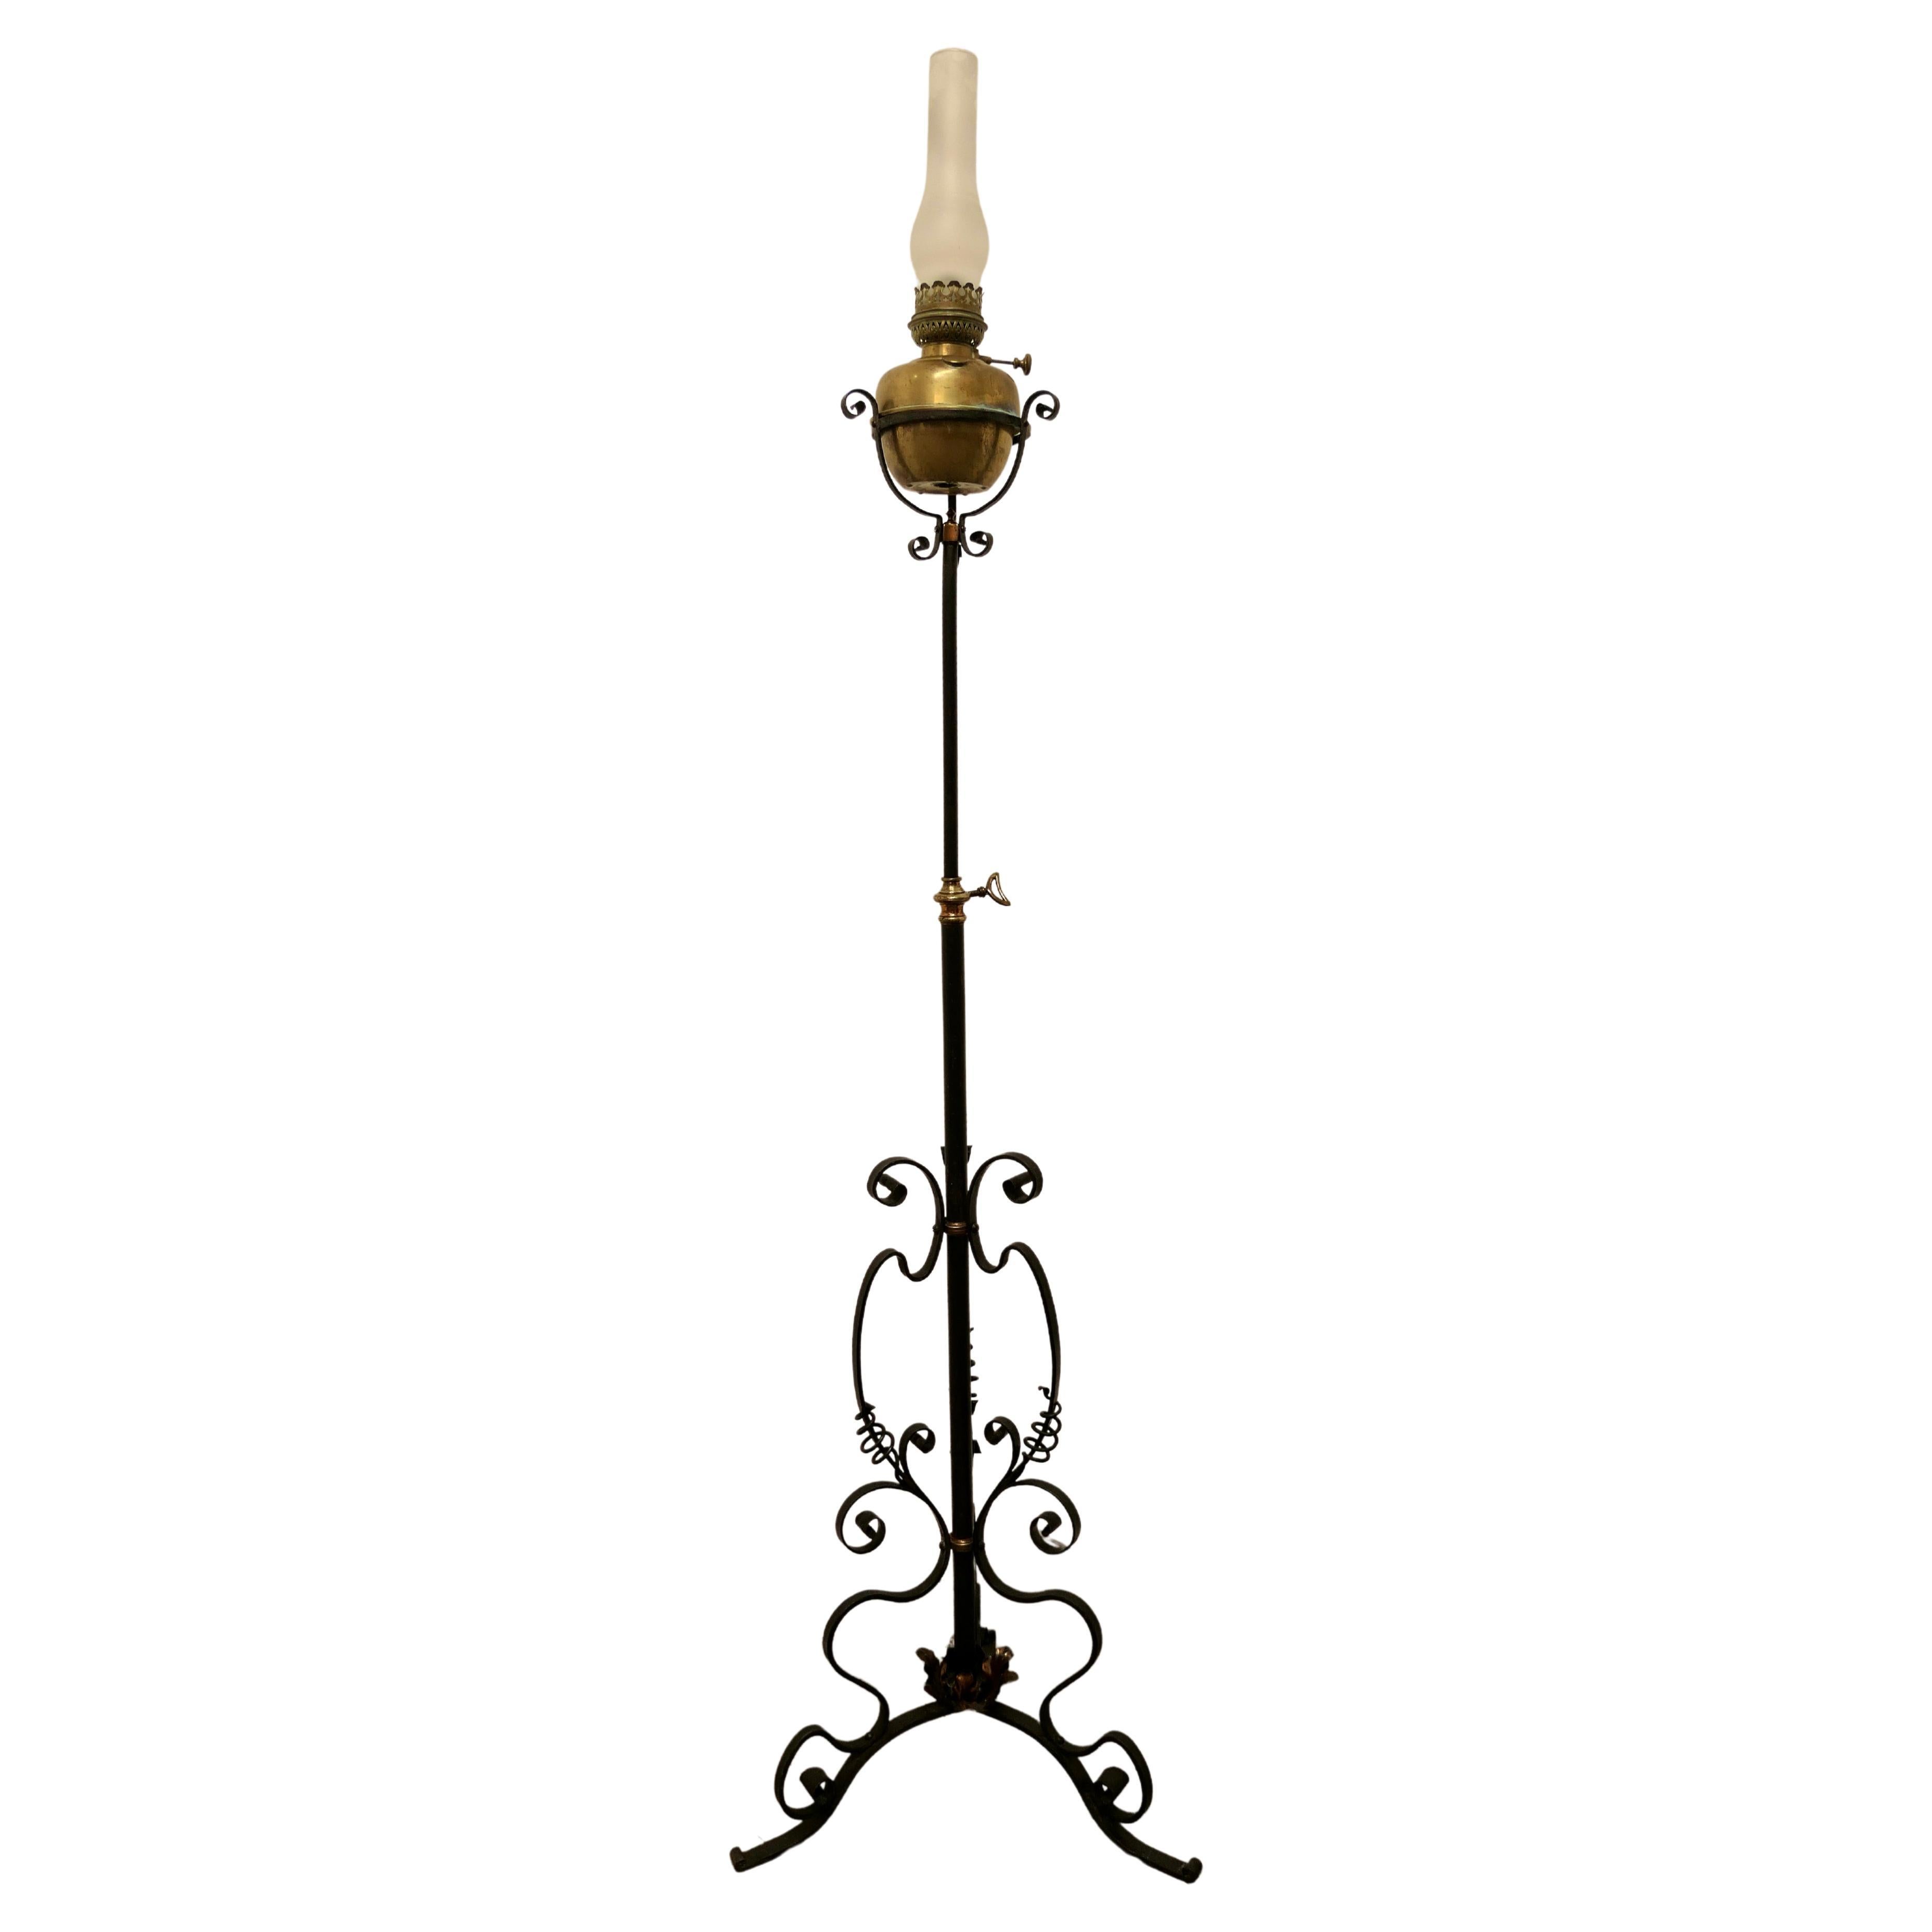 Arts and Crafts Wrought Iron Floor Standing Oil Lamp